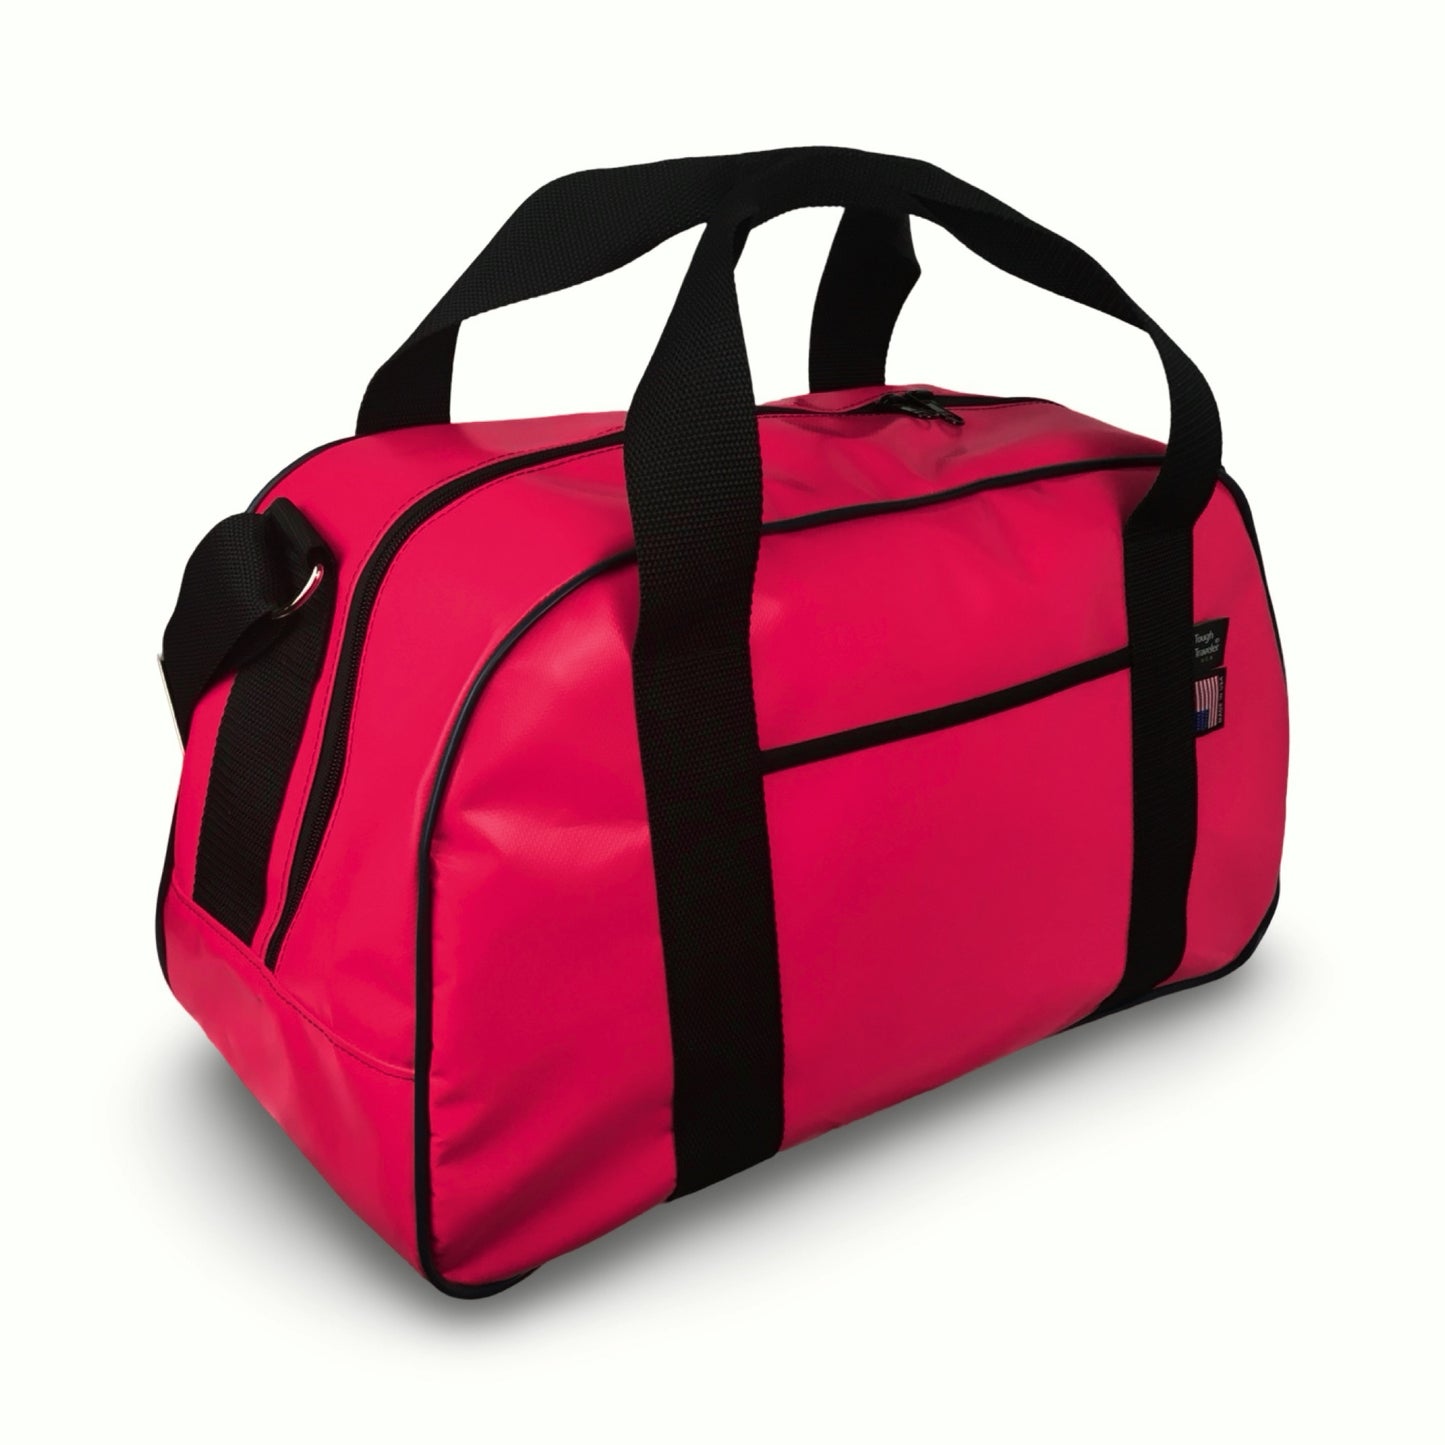 EURO DUFFEL Carry-on Luggage, by Tough Traveler. Made in USA since 1970